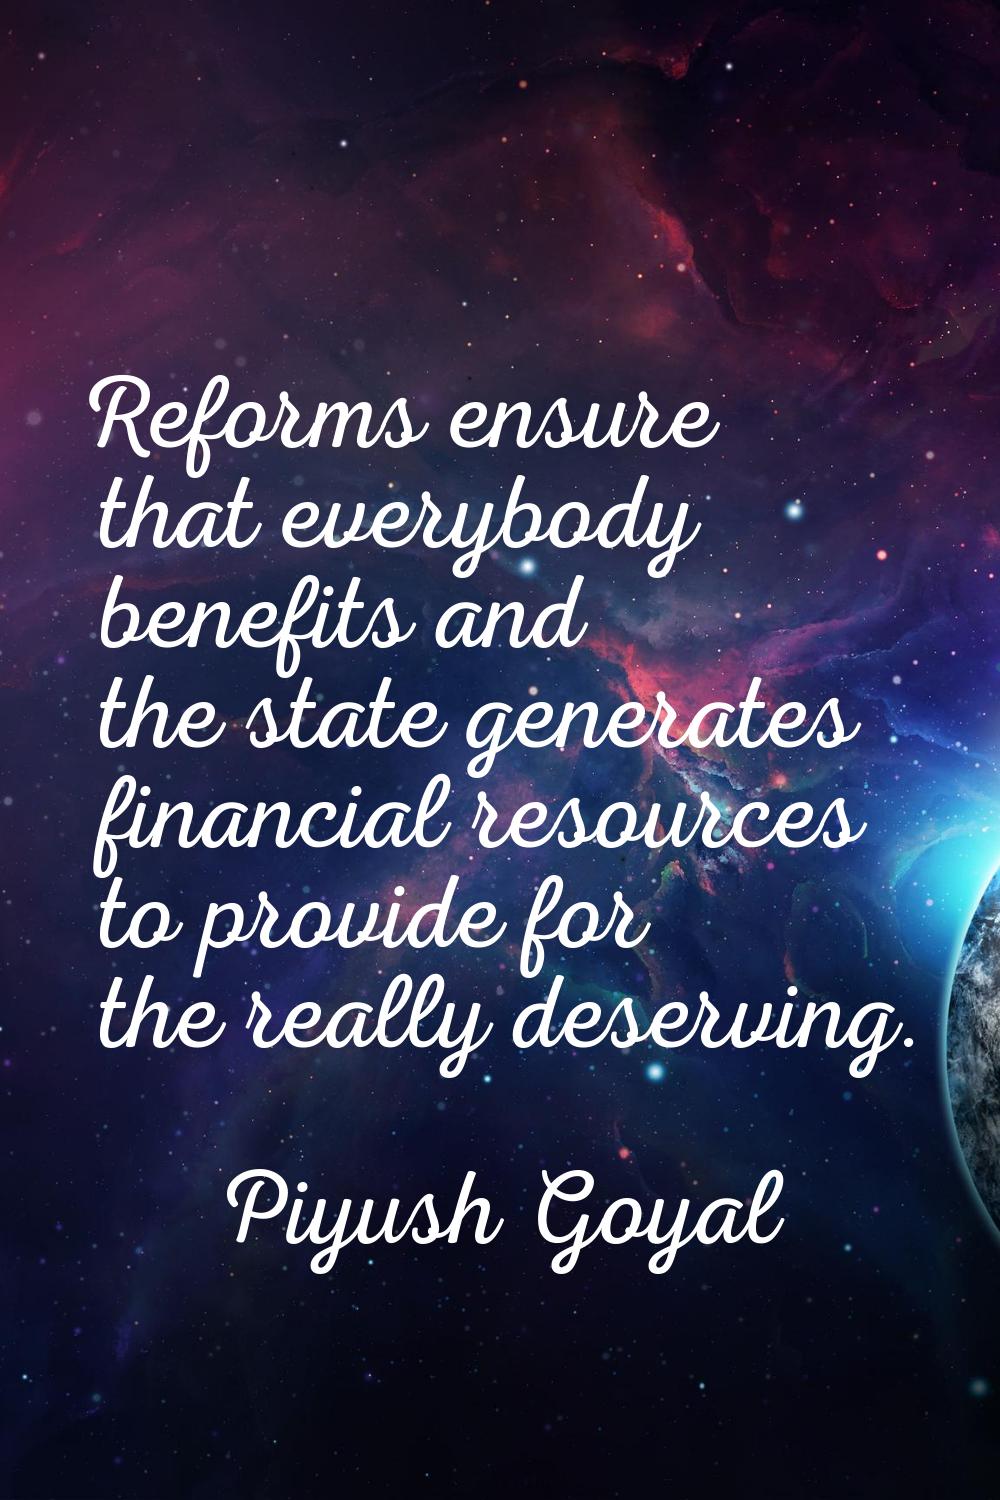 Reforms ensure that everybody benefits and the state generates financial resources to provide for t